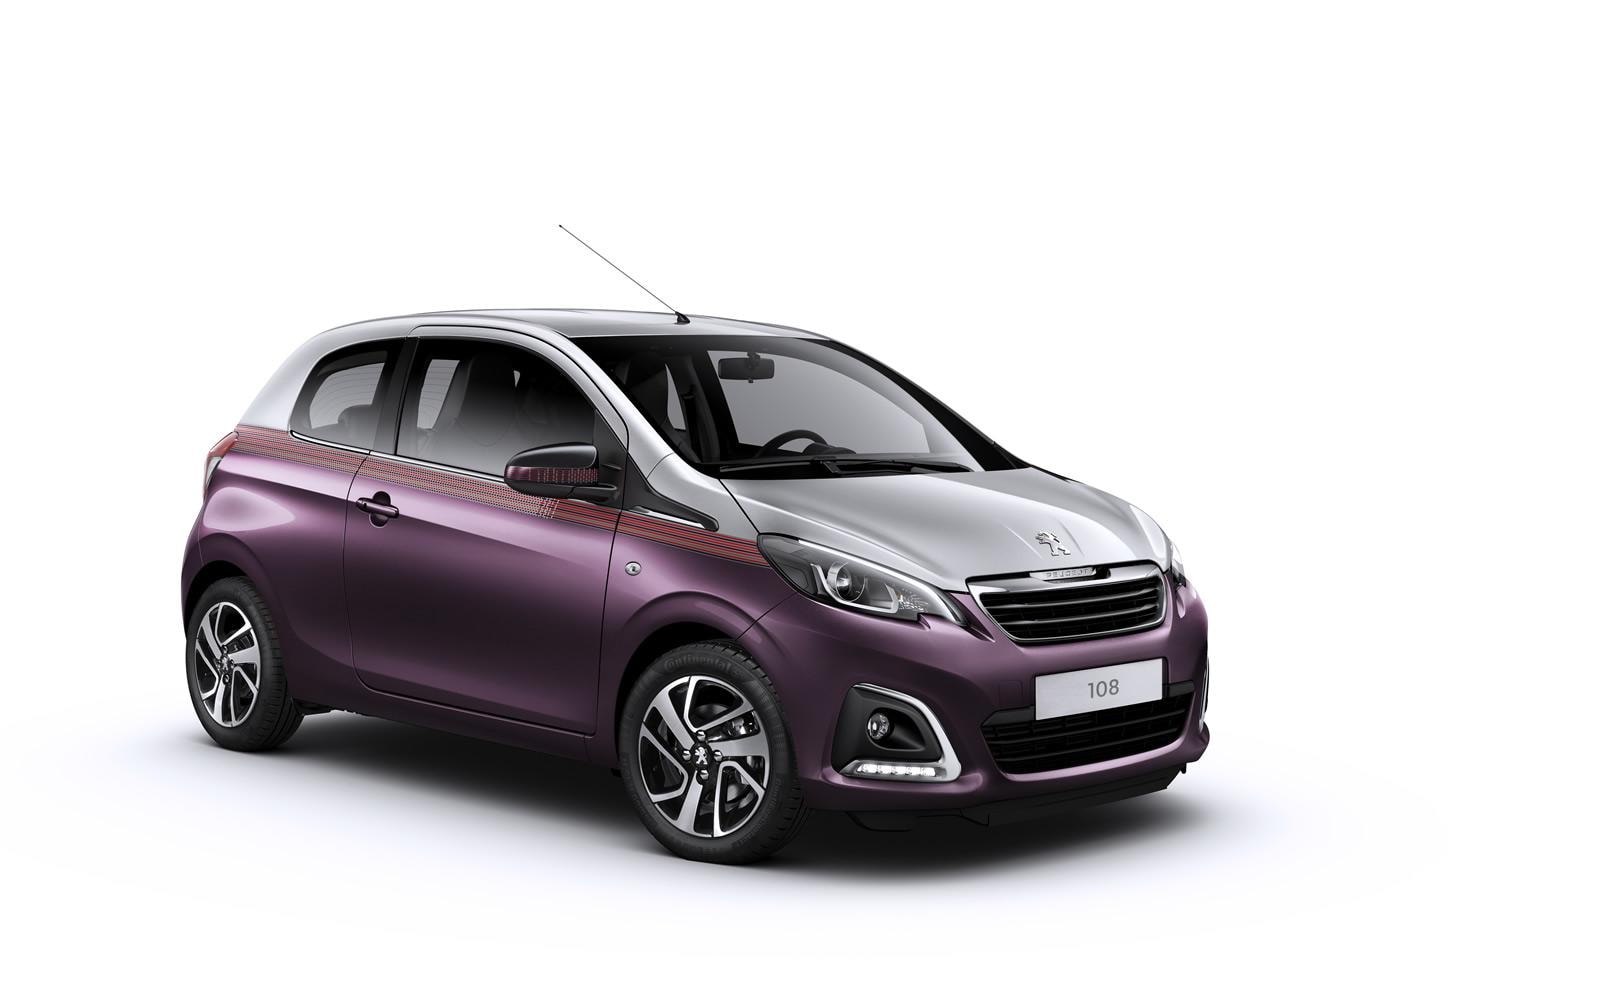 Kollega Pick up blade Uafhængighed Peugeot Reveals New 108 with Convertible Top and Luxury Touches [Live  Photos] - autoevolution